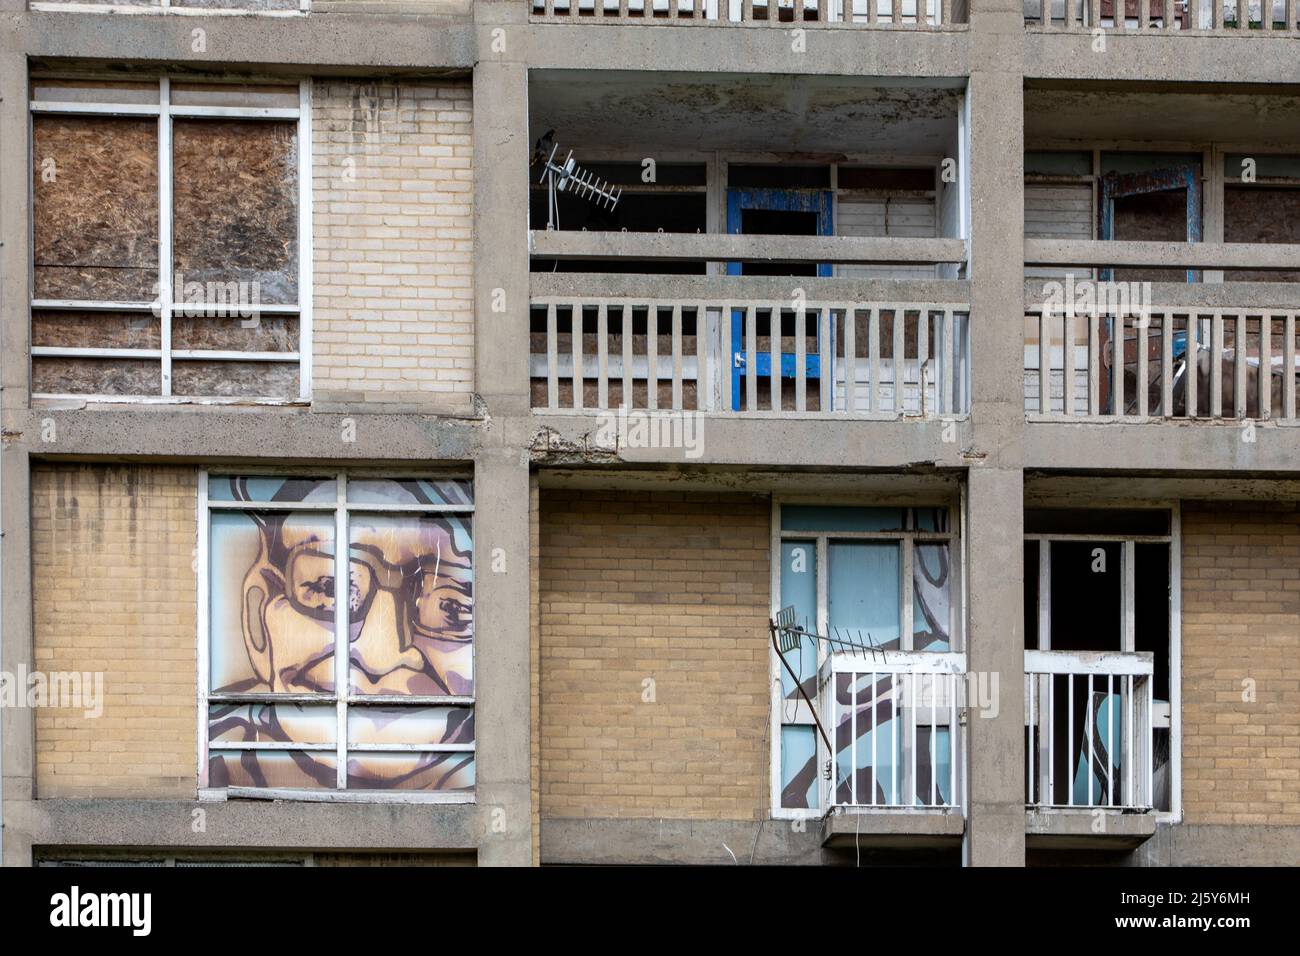 Hyde Park Flats, some of which are still under renovation, Sheffield. Stock Photo